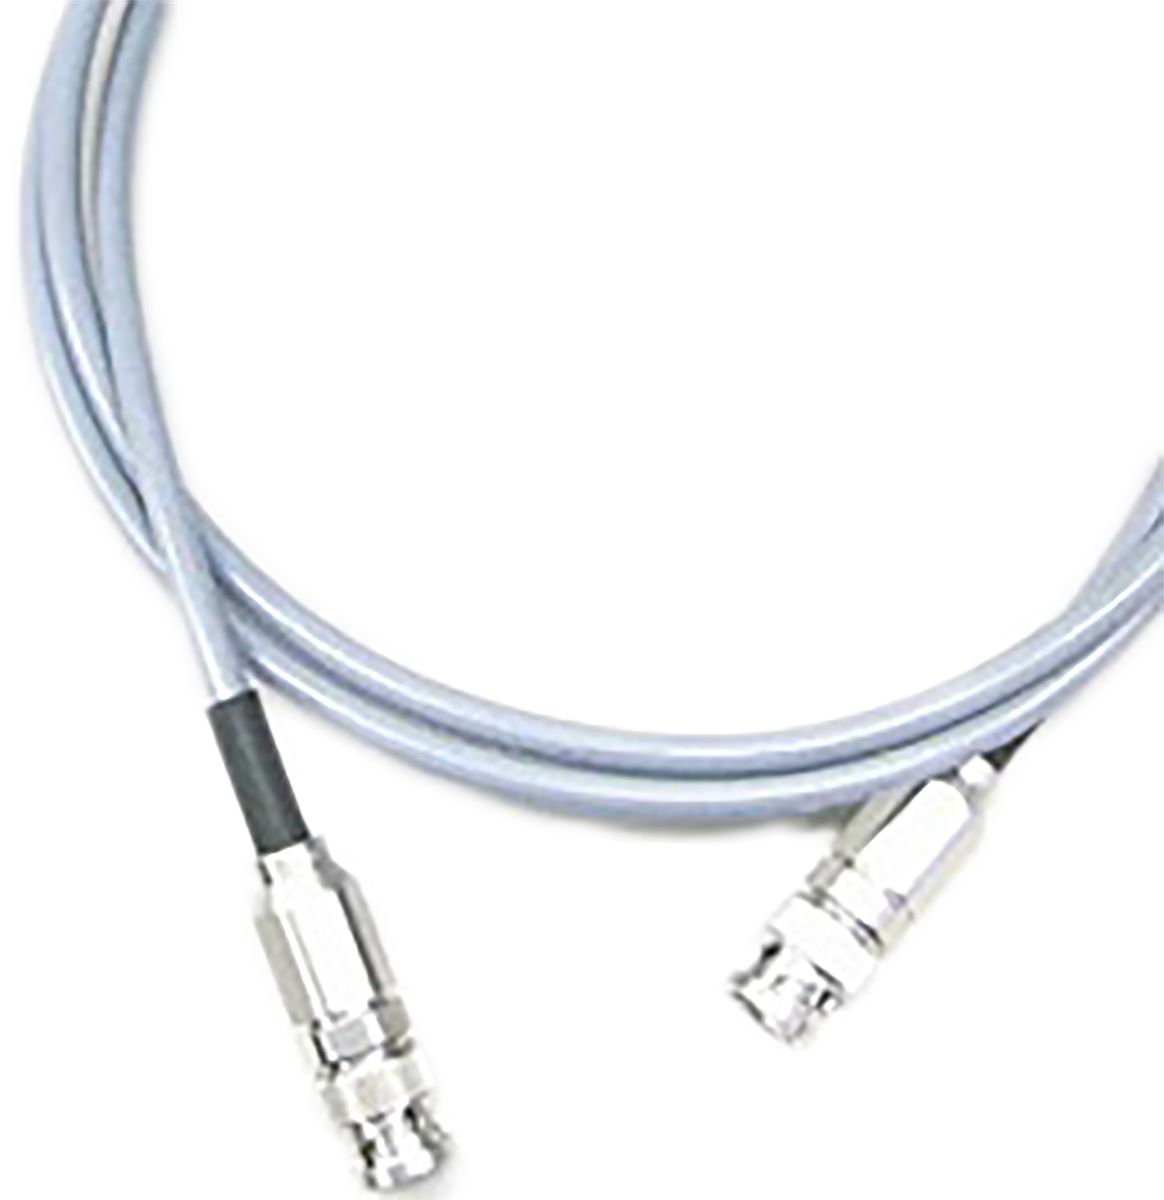 Keysight Technologies Triaxial Cable for Use with Fixture 16442A, Fixture 16442B, SMU